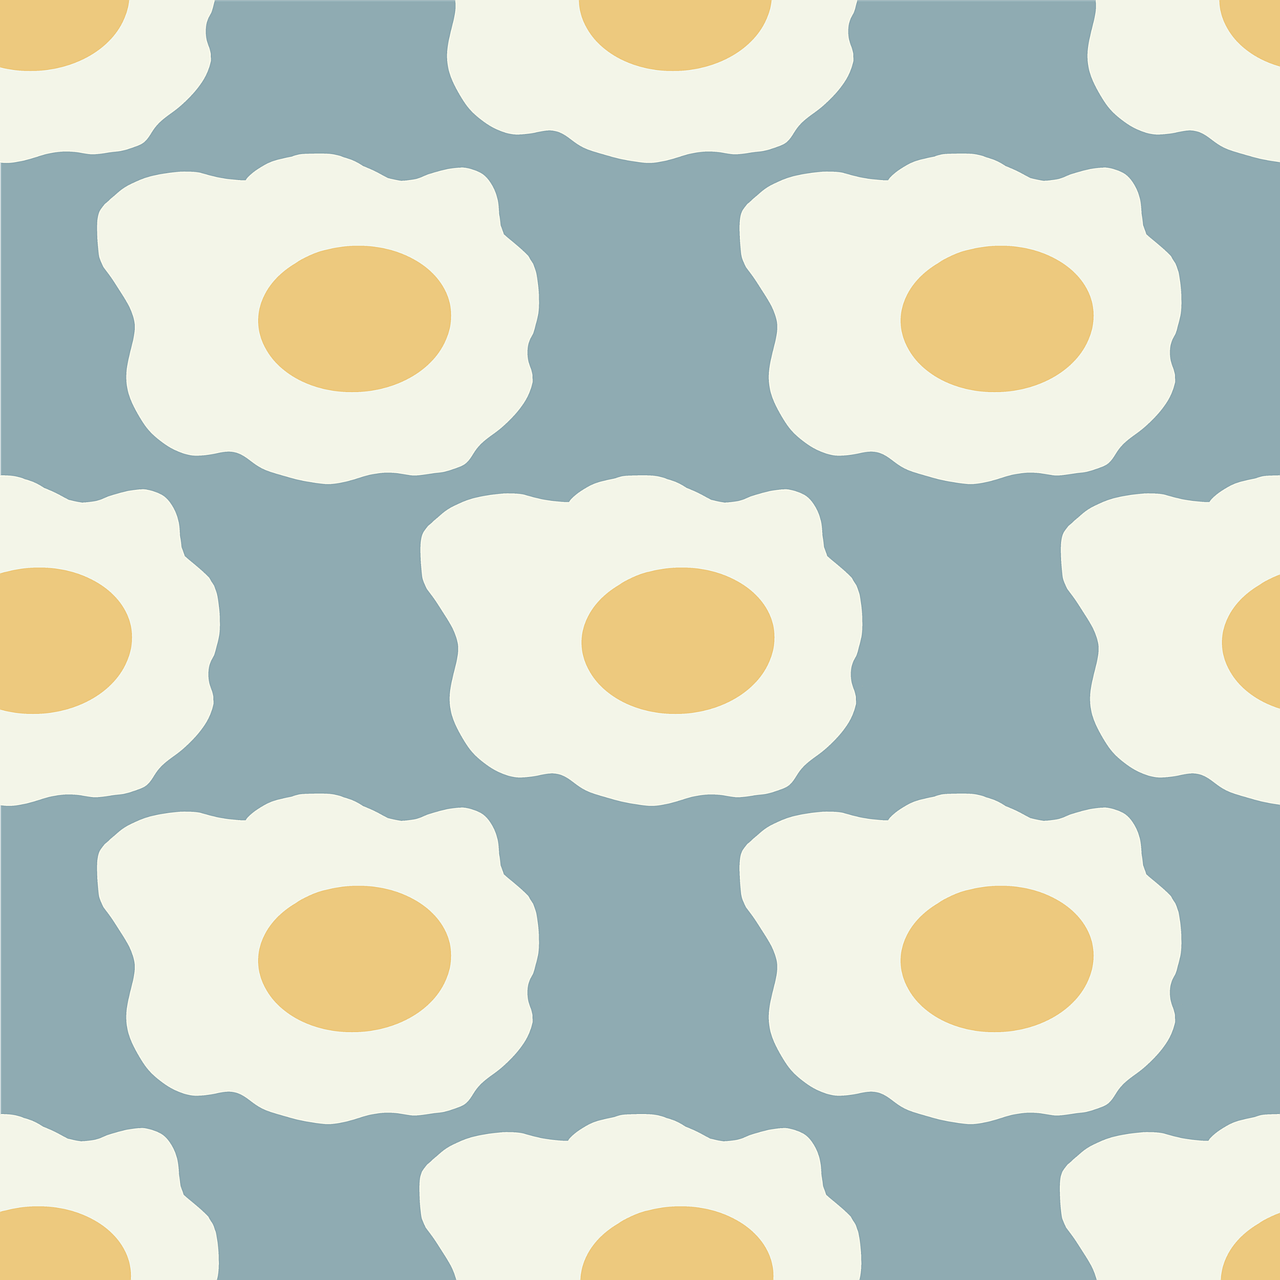 A pattern of eggs on blue and yellow background - Egg